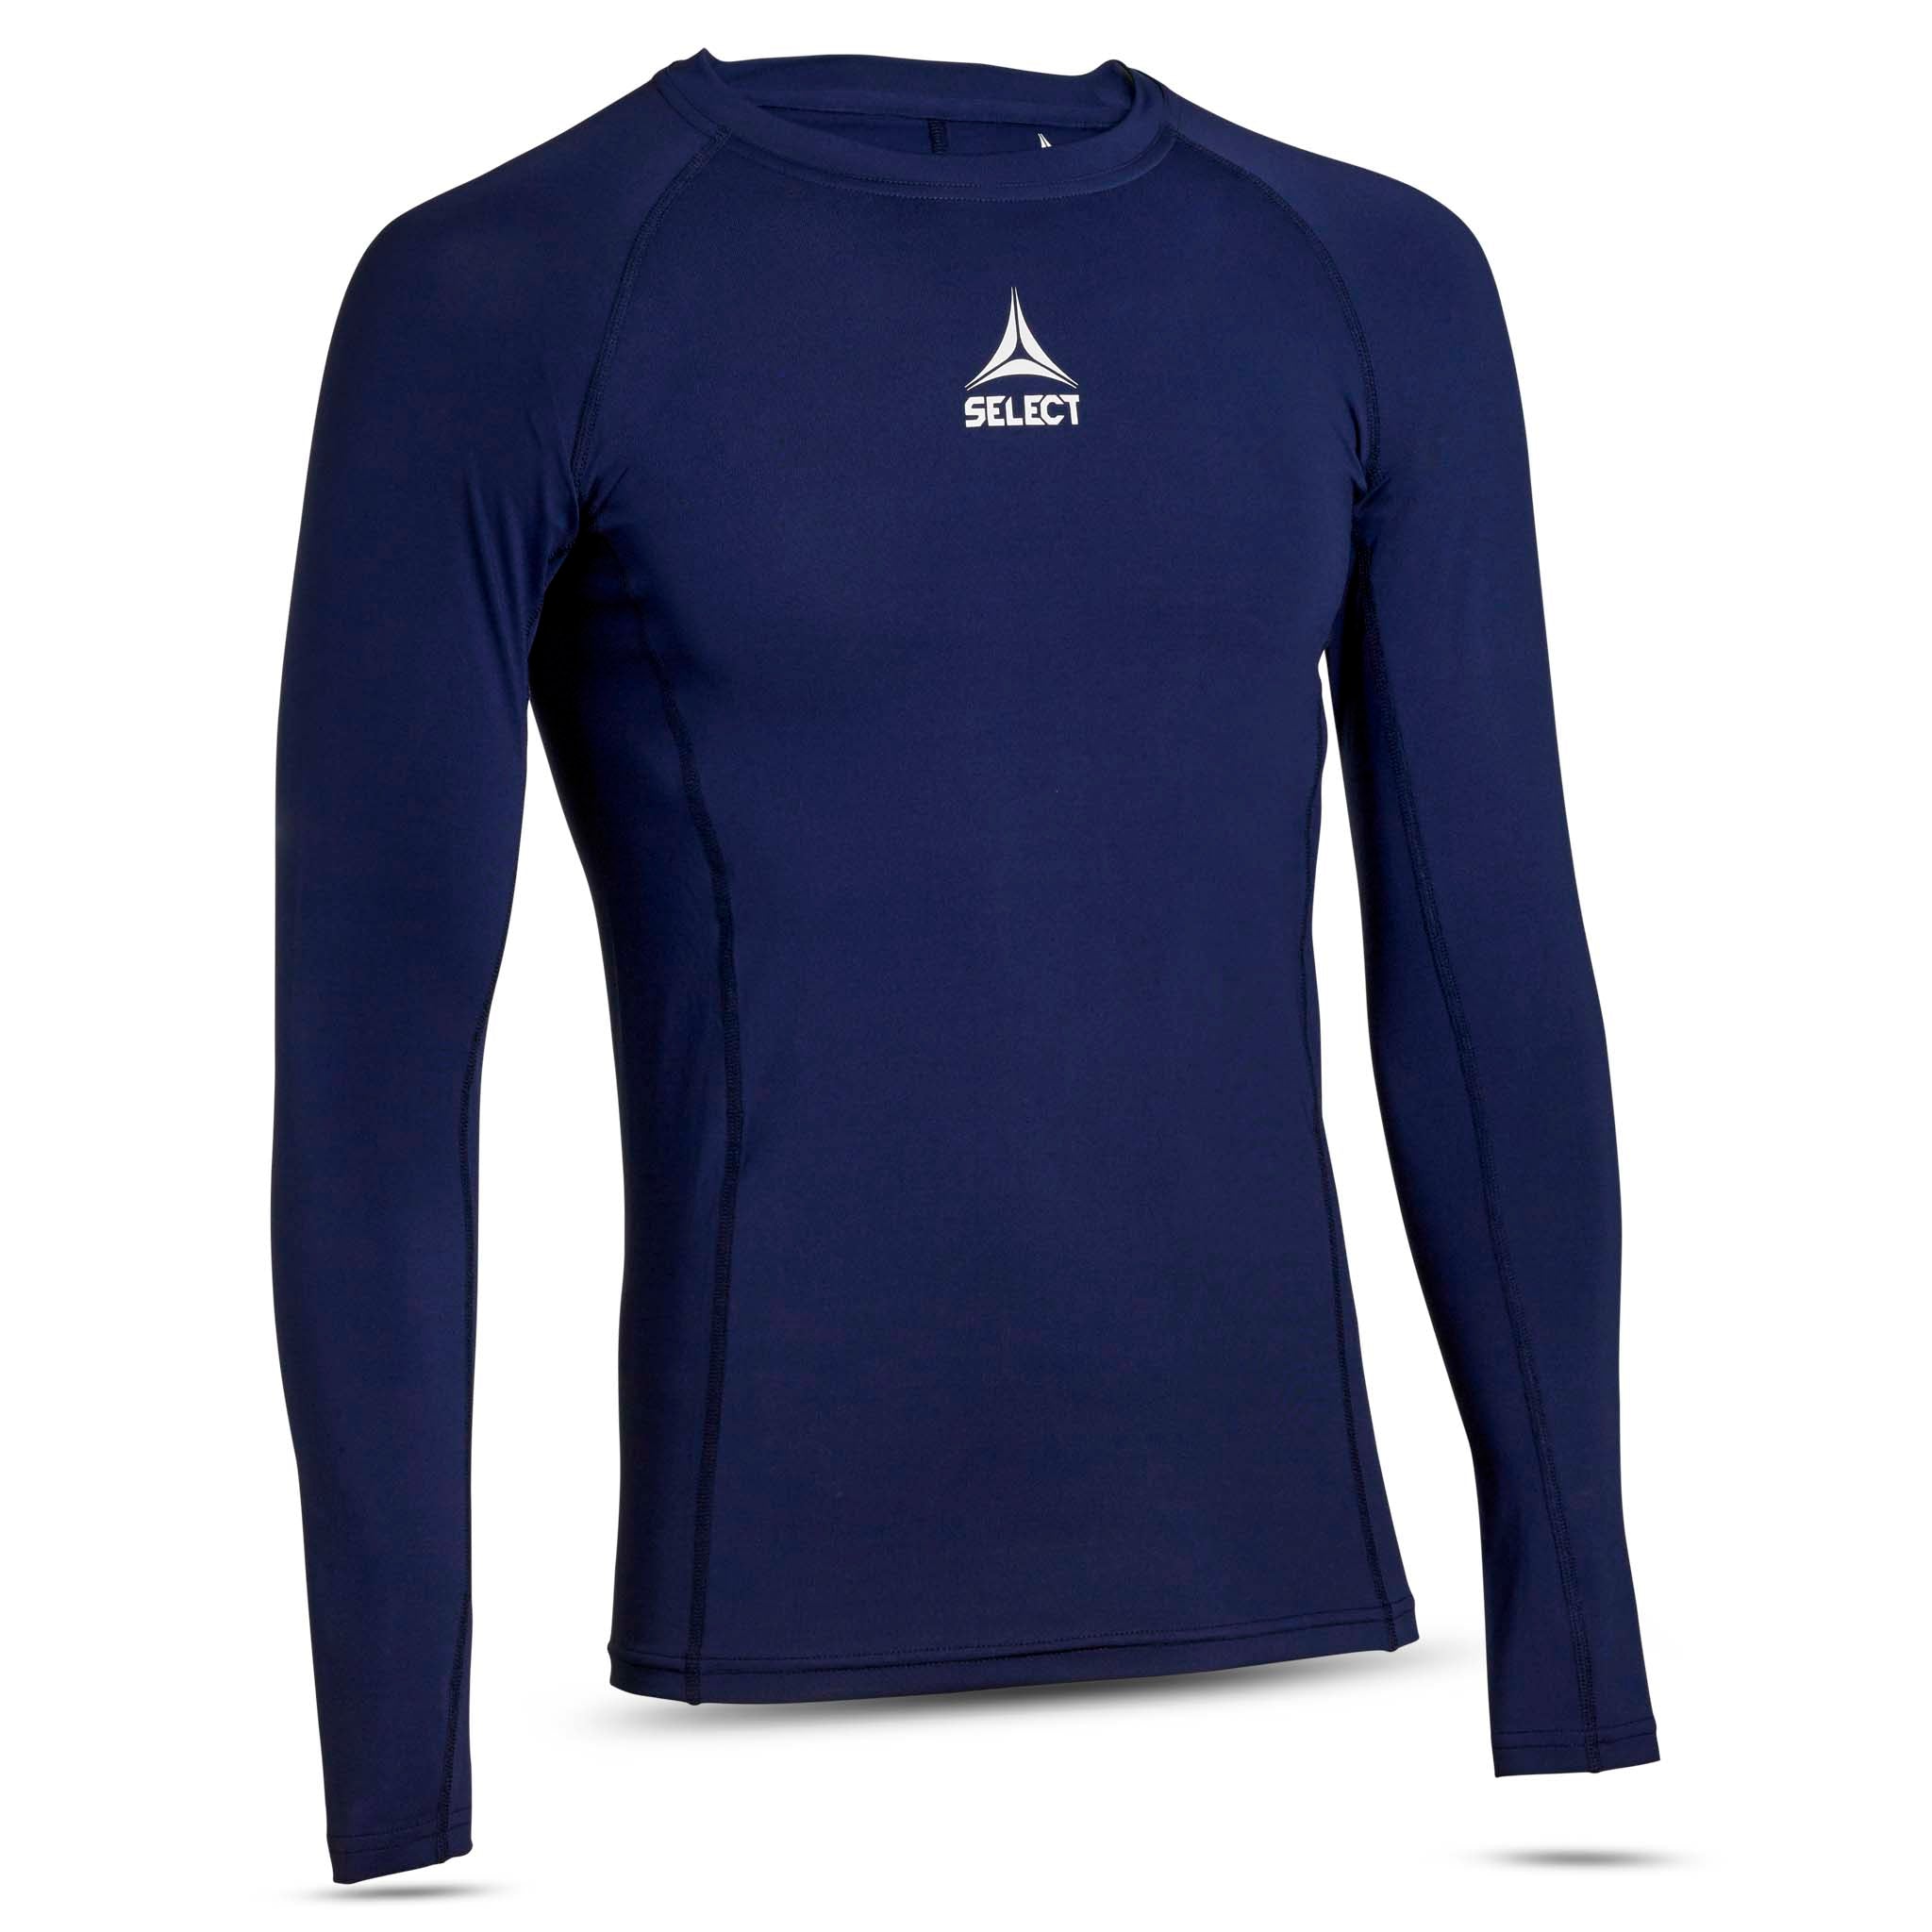 Find all baselayer wear here – SELECT